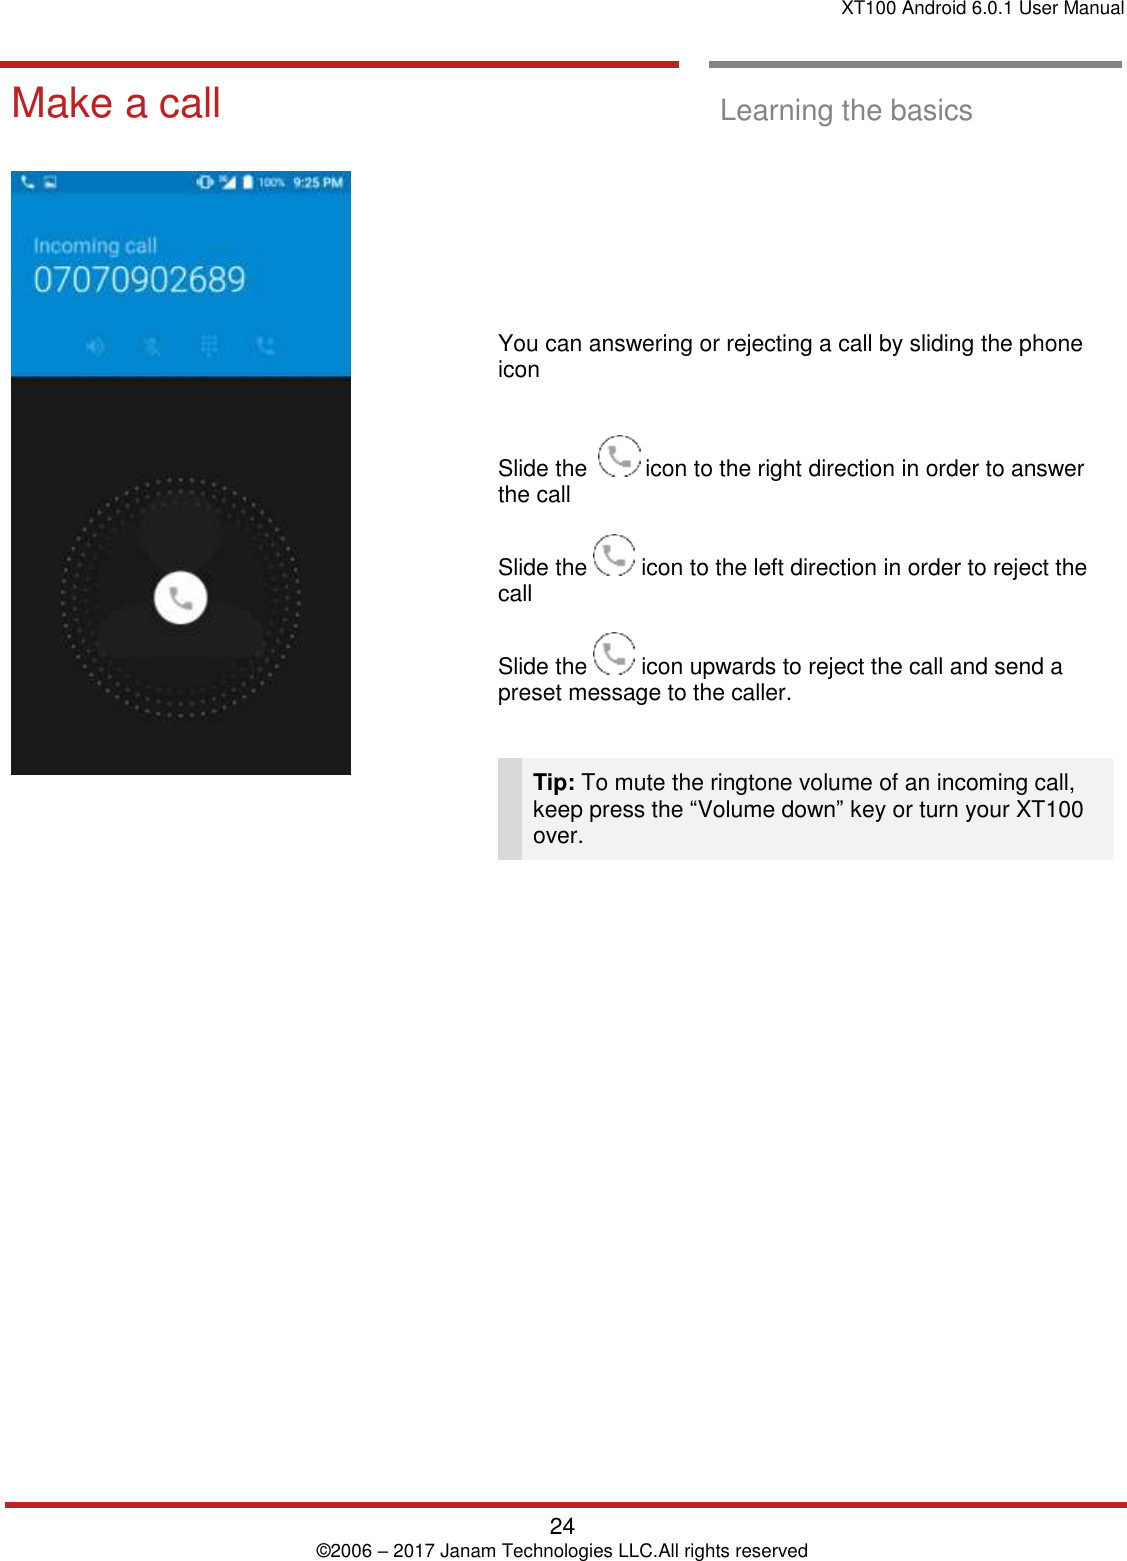 XT100 Android 6.0.1 User Manual   24 © 2006 – 2017 Janam Technologies LLC.All rights reserved  Learning the basics  Make a call  Learning the basics             You can answering or rejecting a call by sliding the phone icon   Slide the    icon to the right direction in order to answer the call  Slide the   icon to the left direction in order to reject the call  Slide the   icon upwards to reject the call and send a preset message to the caller.    Tip: To mute the ringtone volume of an incoming call, keep press the “Volume down” key or turn your XT100 over.  